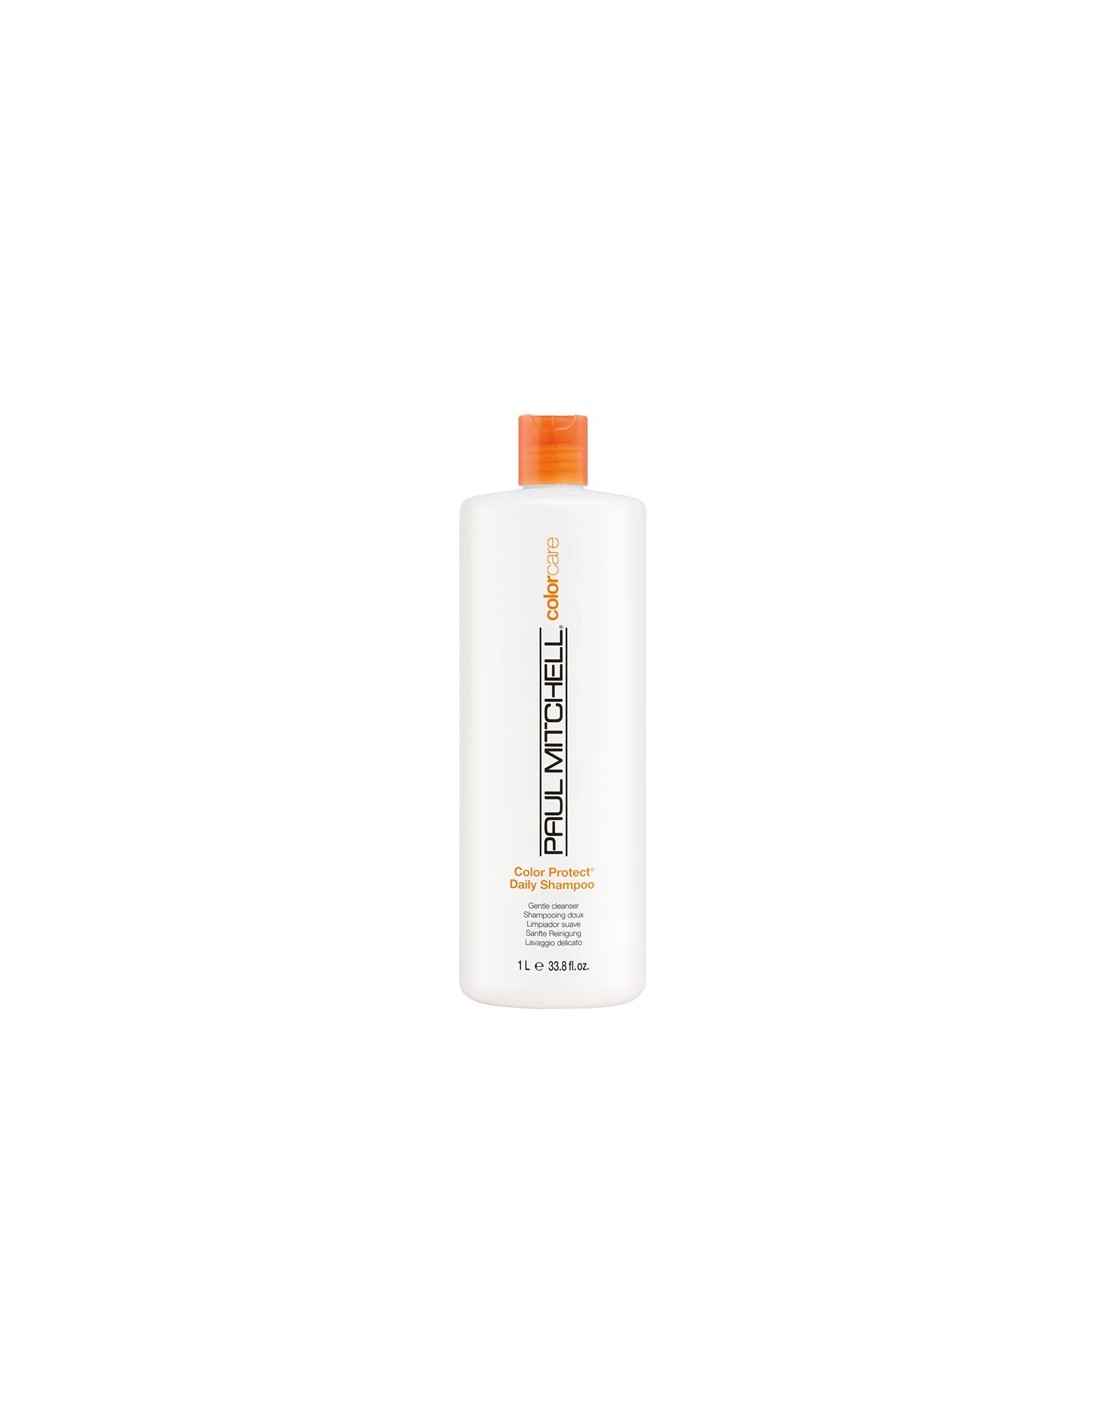 Paul Mitchell Color Protect Shampoo - 1L